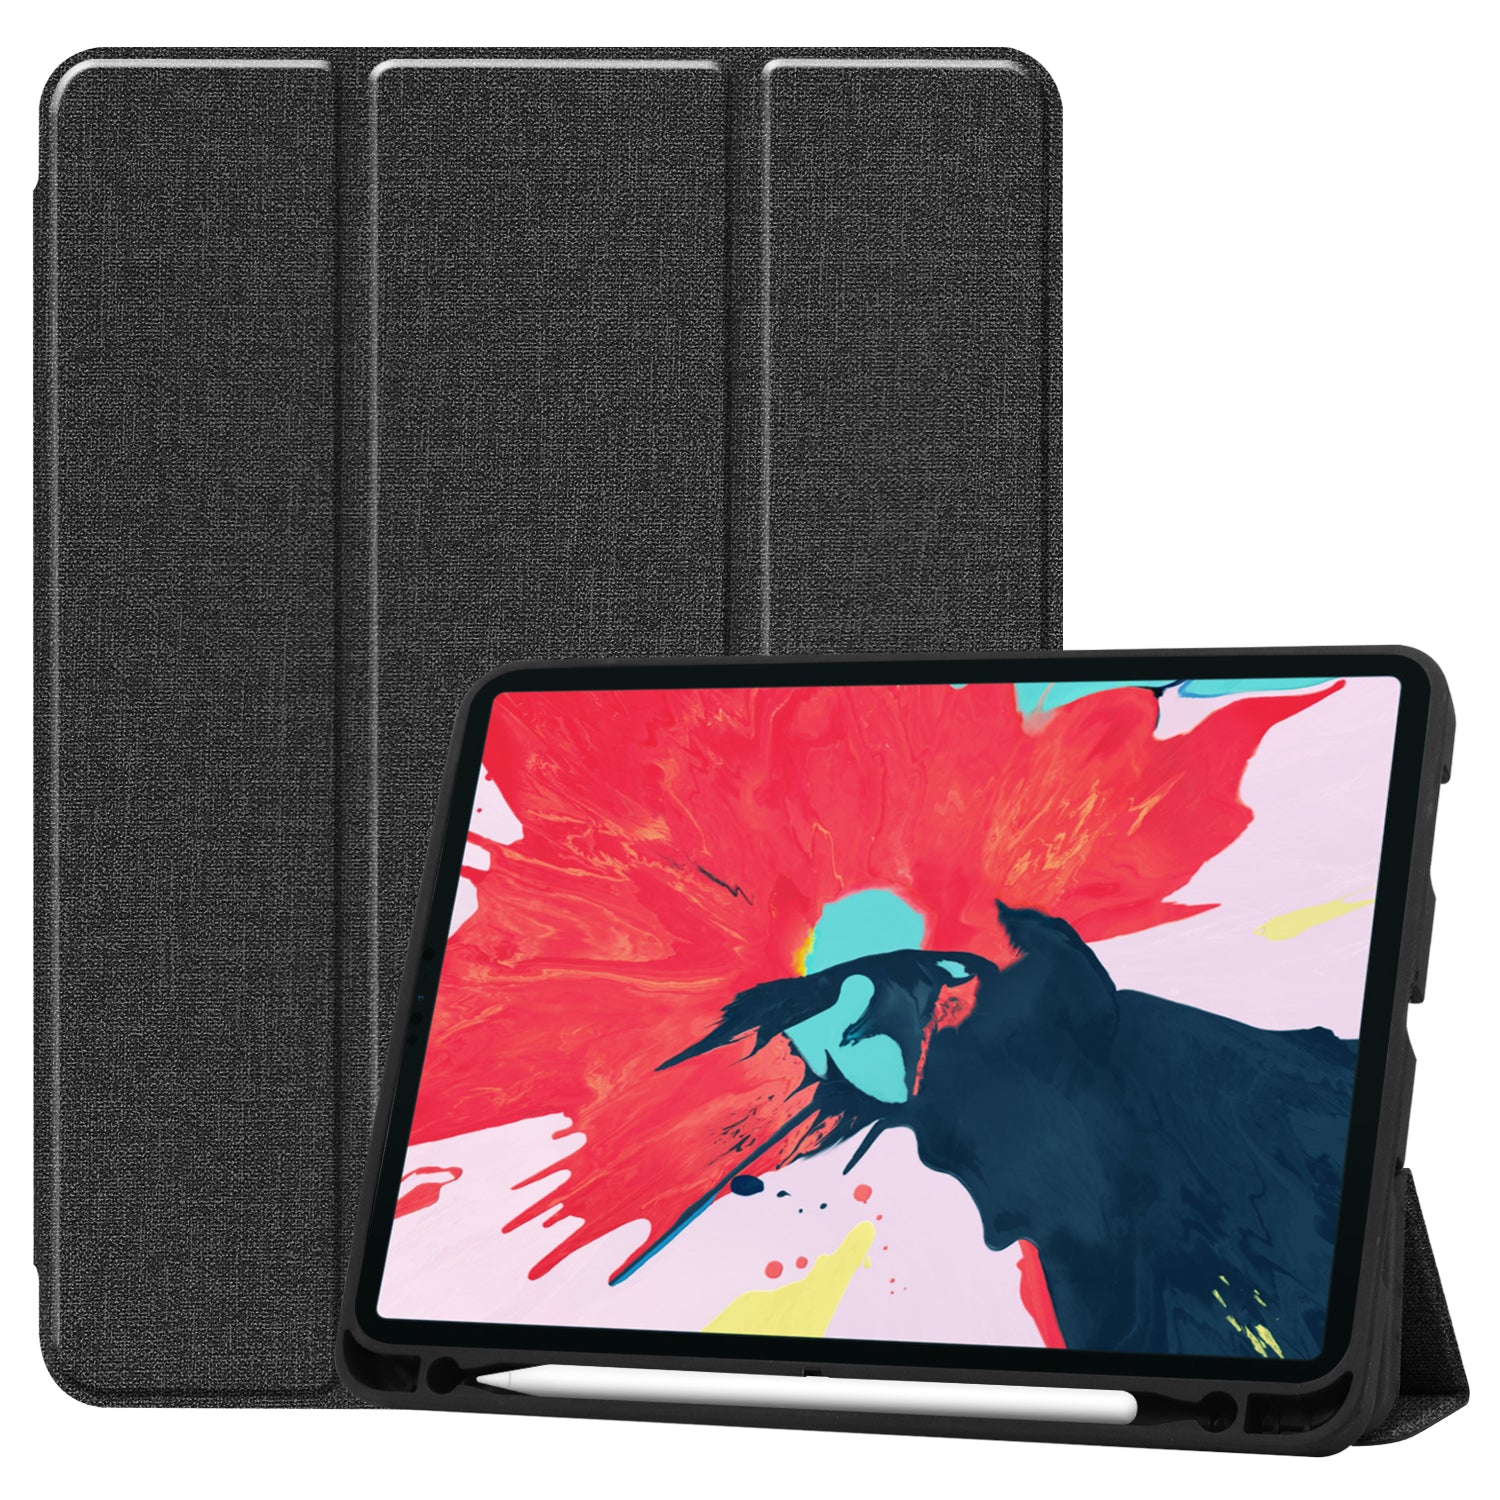 11 inch Foldable TPU Protective Shell Tablet Cover Case Shatter-resistant with Pen Slot for iPadPro black ZopiStyle